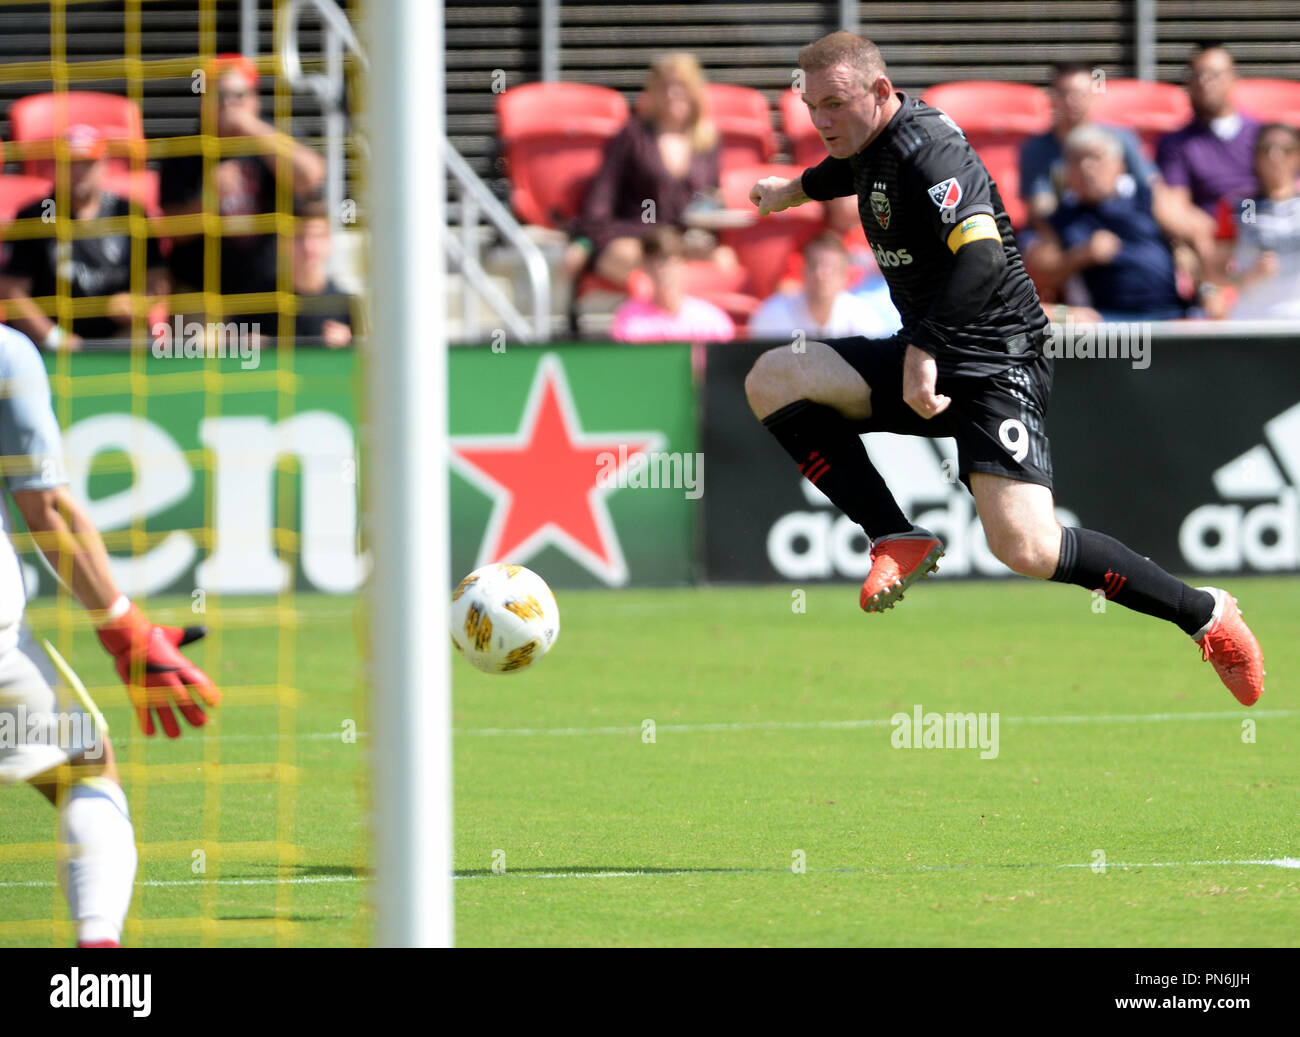 Washington, DC, USA. 16th Sep, 2018. 20180916 - D.C. United forward WAYNE ROONEY (9) gets airborne on a shot against New York Red Bulls goalkeeper Luis Robles in the first half at Audi Field in Washington. Credit: Chuck Myers/ZUMA Wire/Alamy Live News Stock Photo